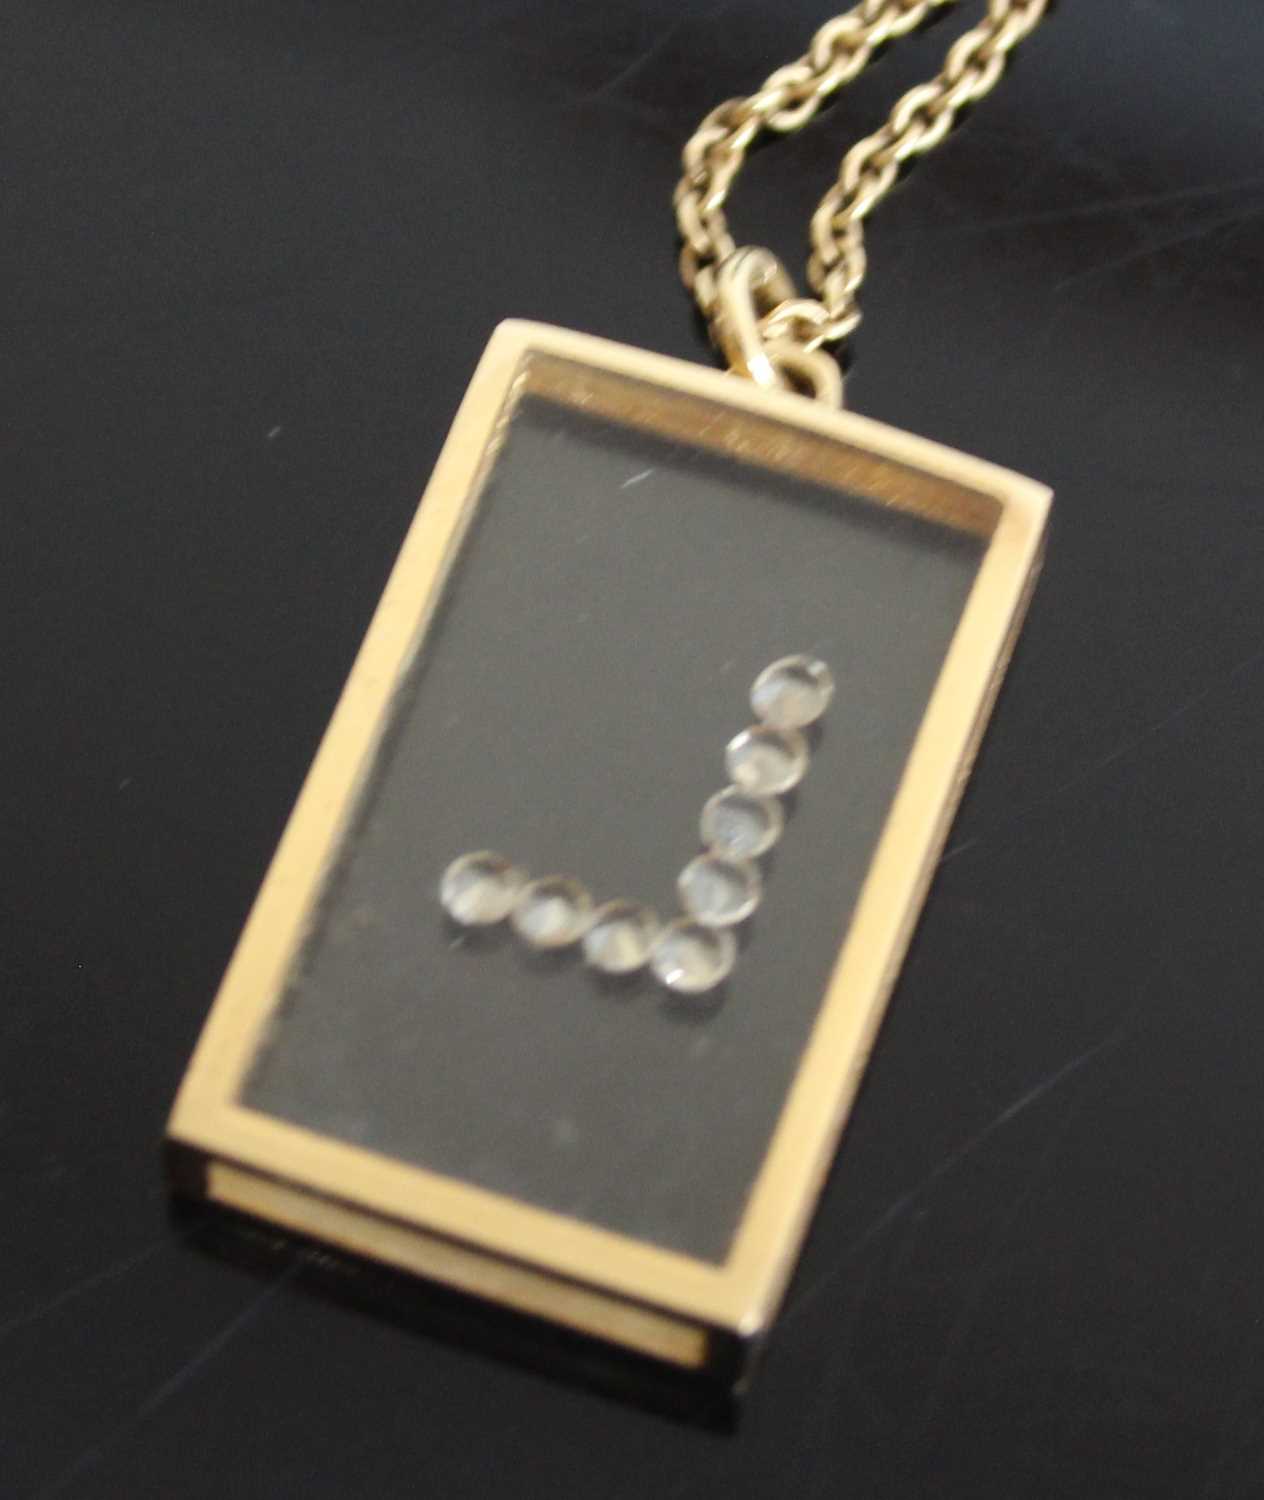 A yellow metal rectangular glass pendant with 8 1.5mm single cut white stones in a letter L shape - Image 4 of 5